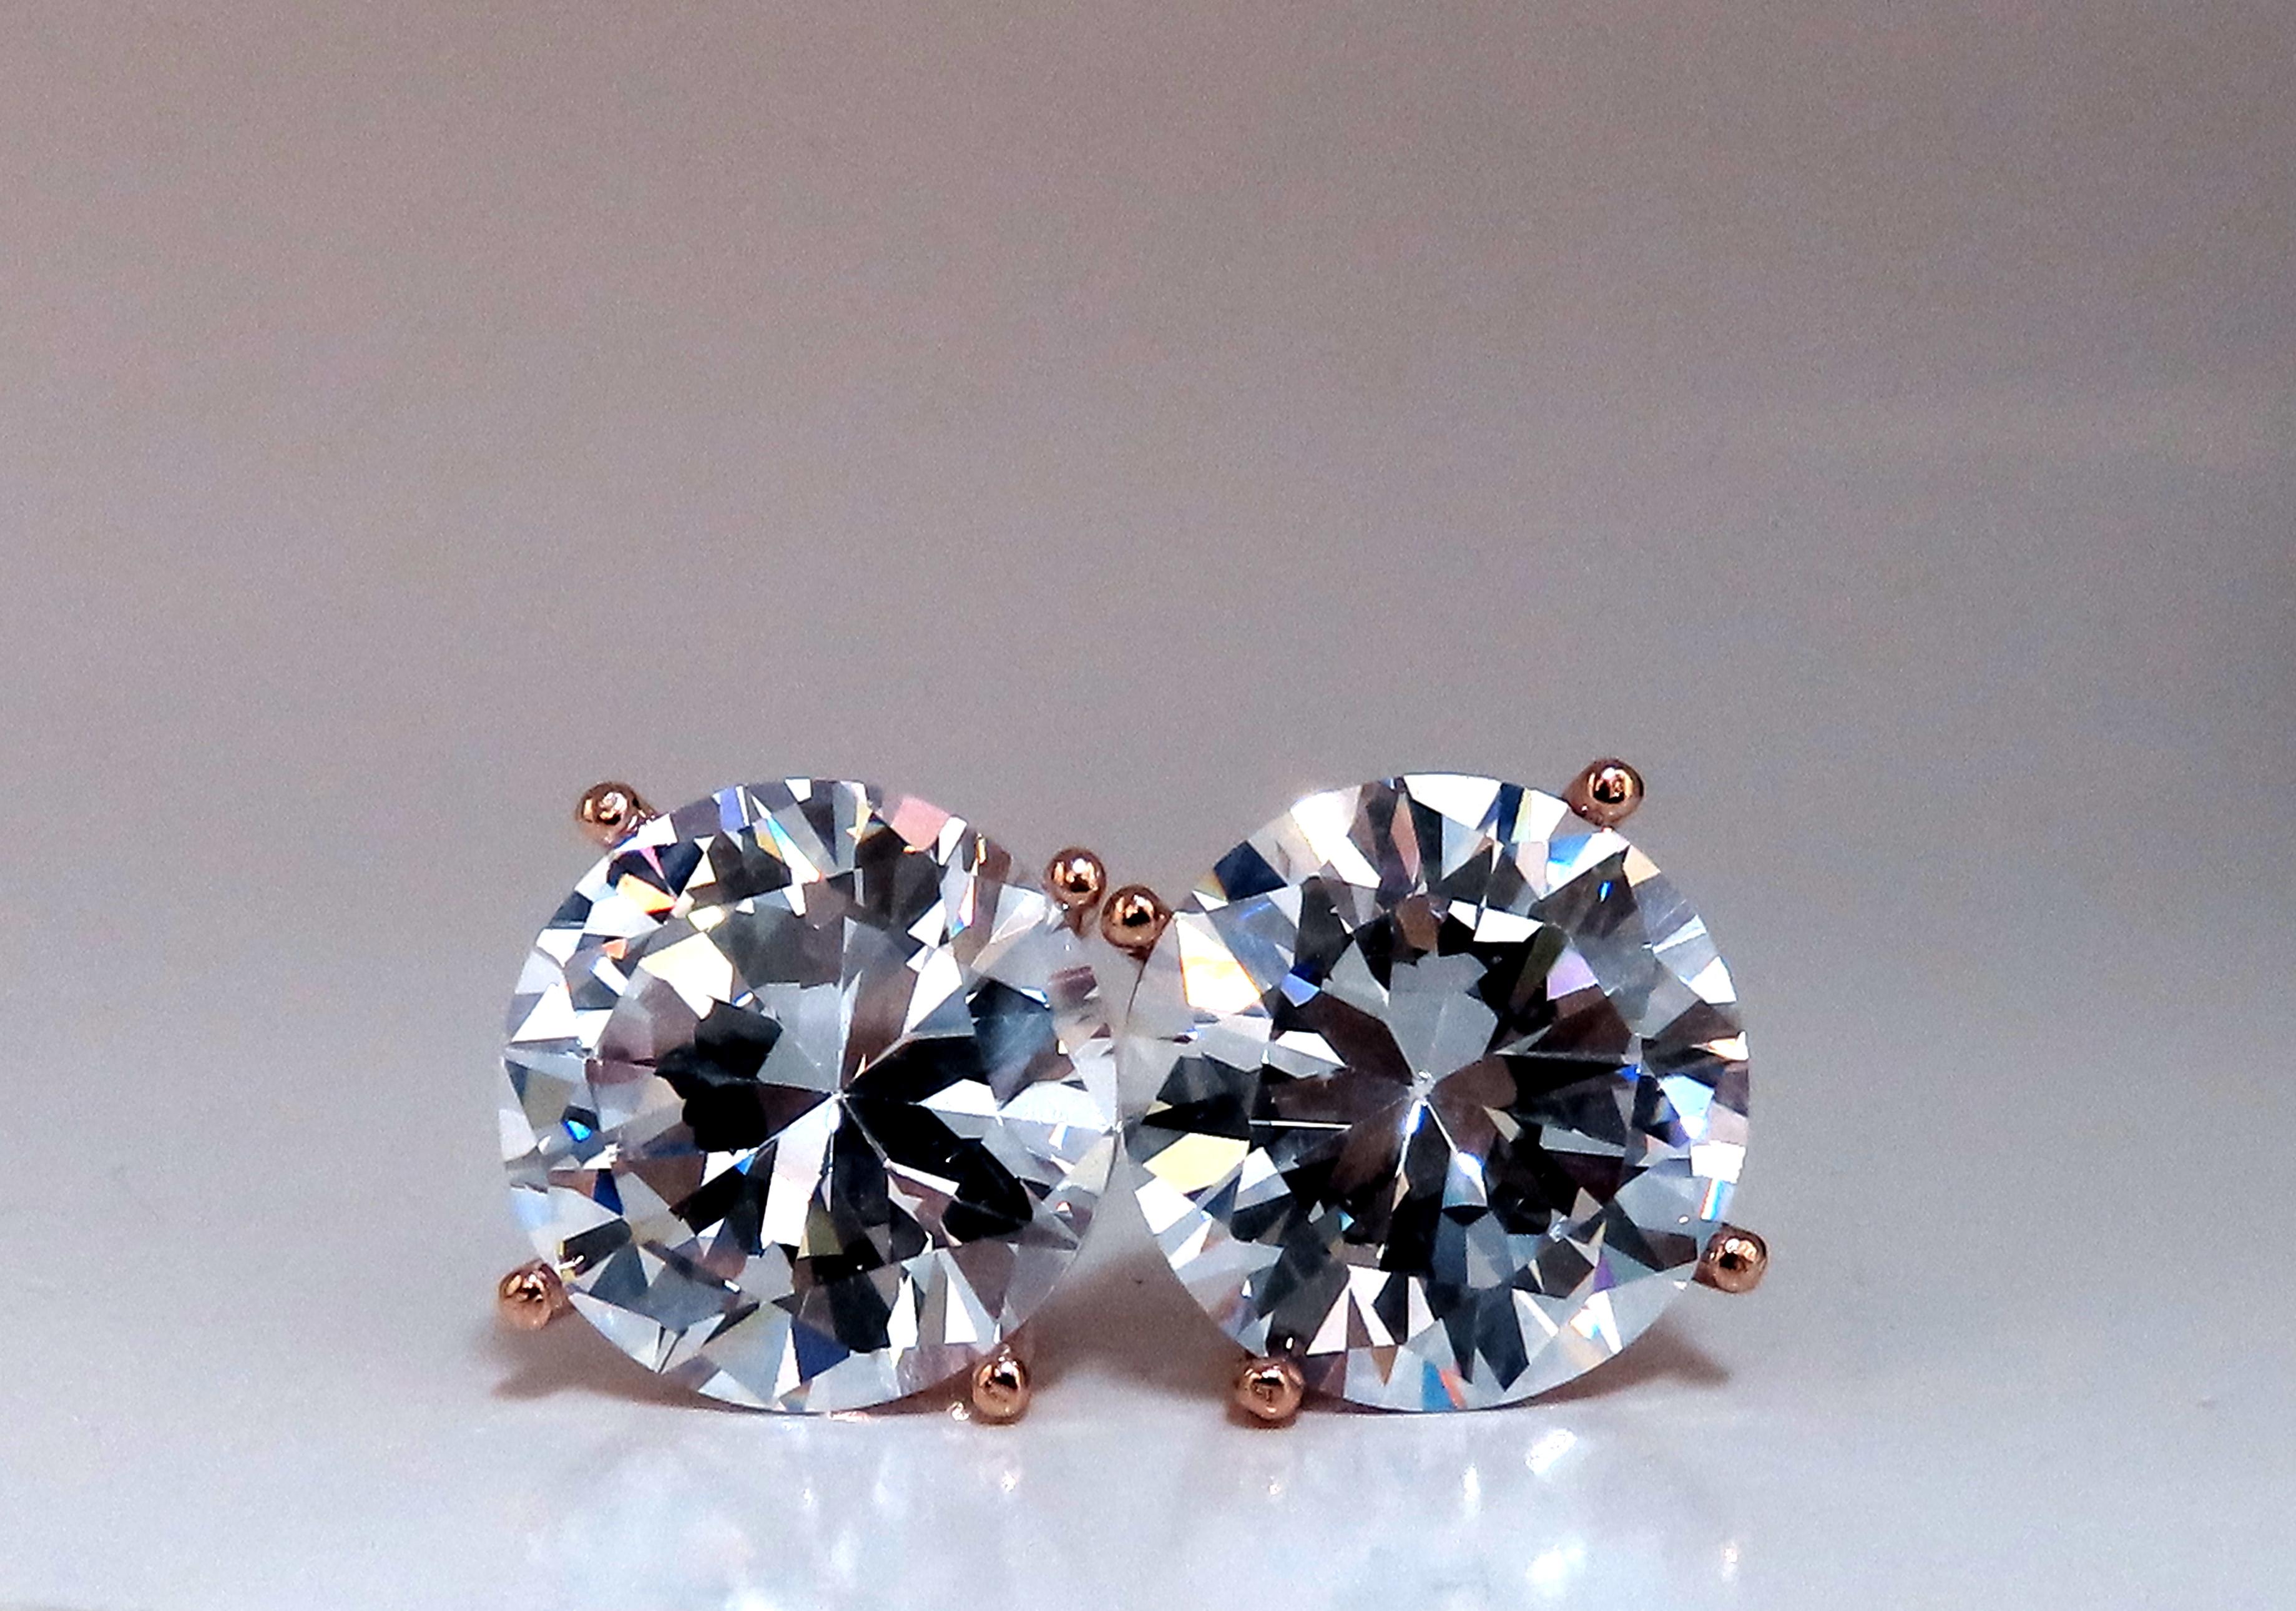 GIA Certified Round Diamond Stud Earrings.
10.76ct & 10.95ct.
Diamonds are both: 
Vs-2 clarity.
Flawless
Type 2a
Excellent Cut 
Excellent Polish
Excellent Symmetry
No Florescence. 
Comfortable Stud 18 Karat

To Ship Via Armored Service / Possible